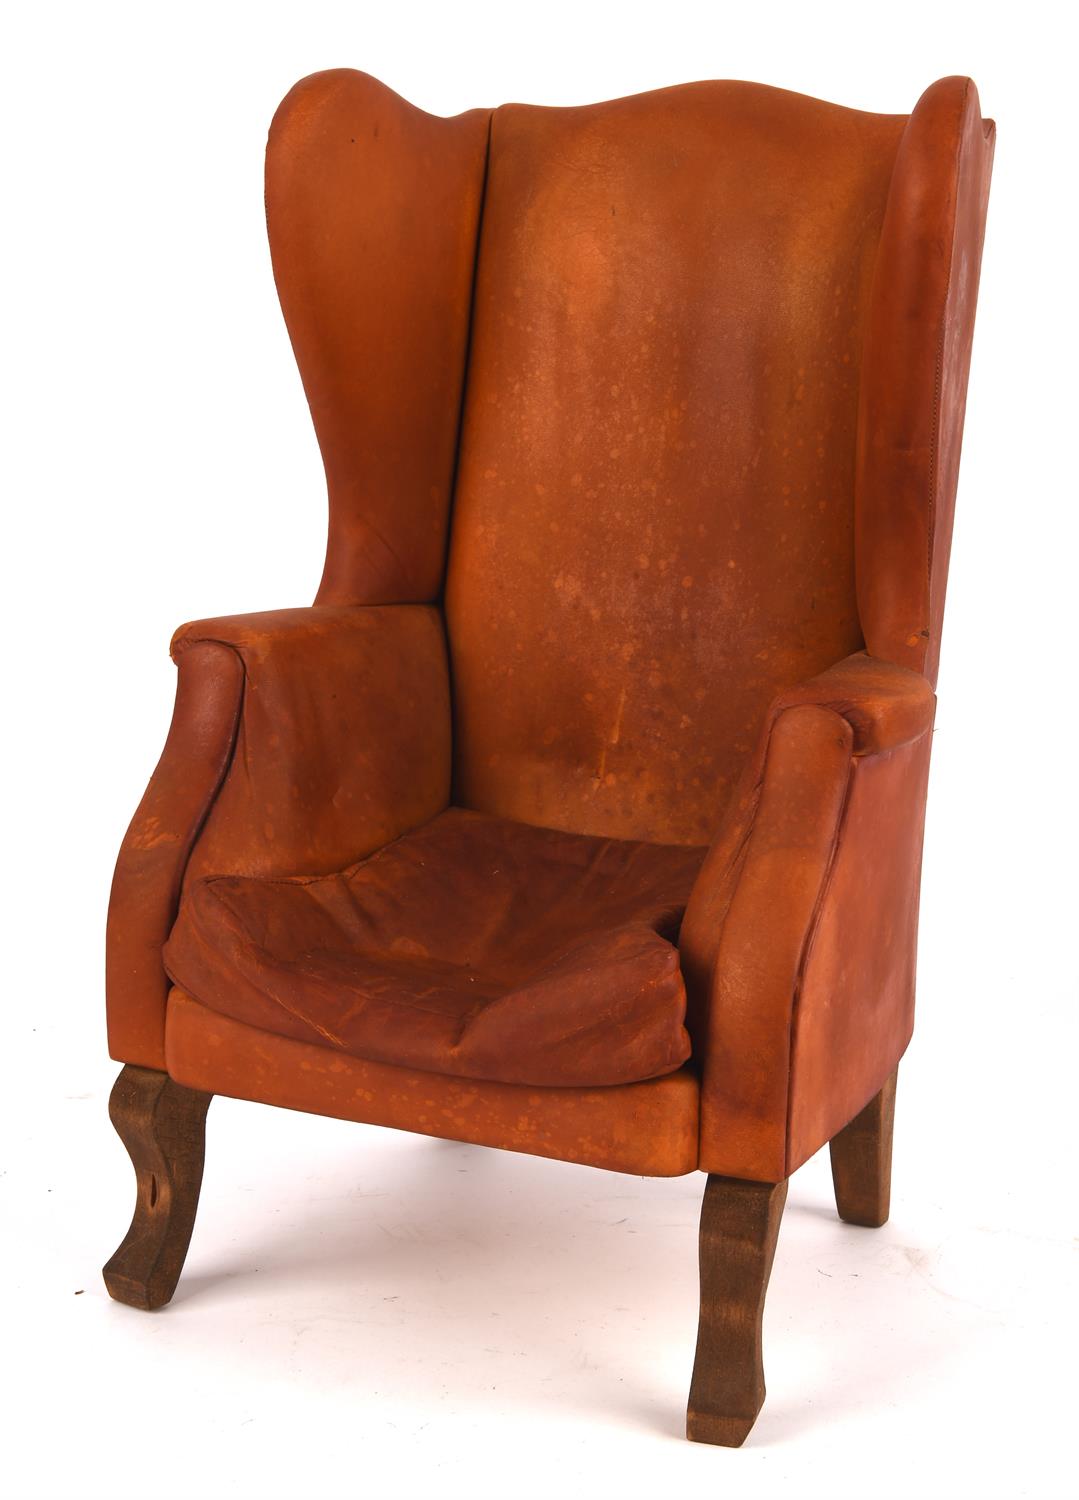 Gerry Anderson: The Secret Service (1969) - Original prop, tan leather wing-backed chair with